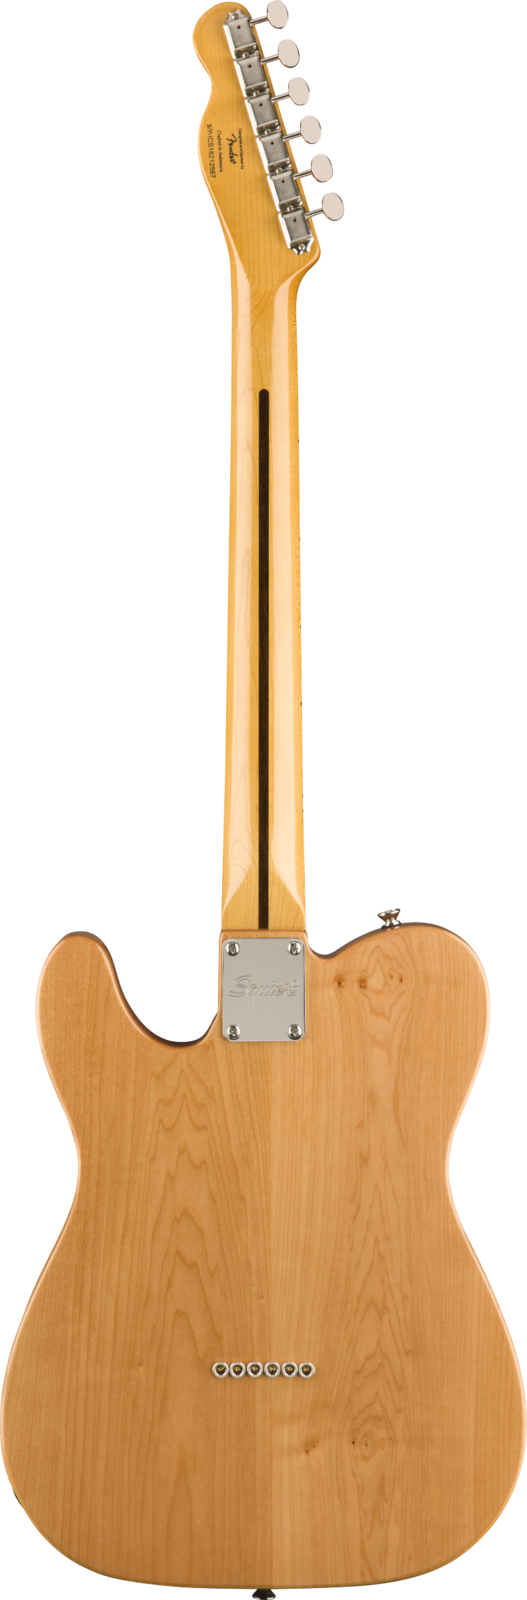 Squier Classic Vibe '70s Telecaster Thinline Natural